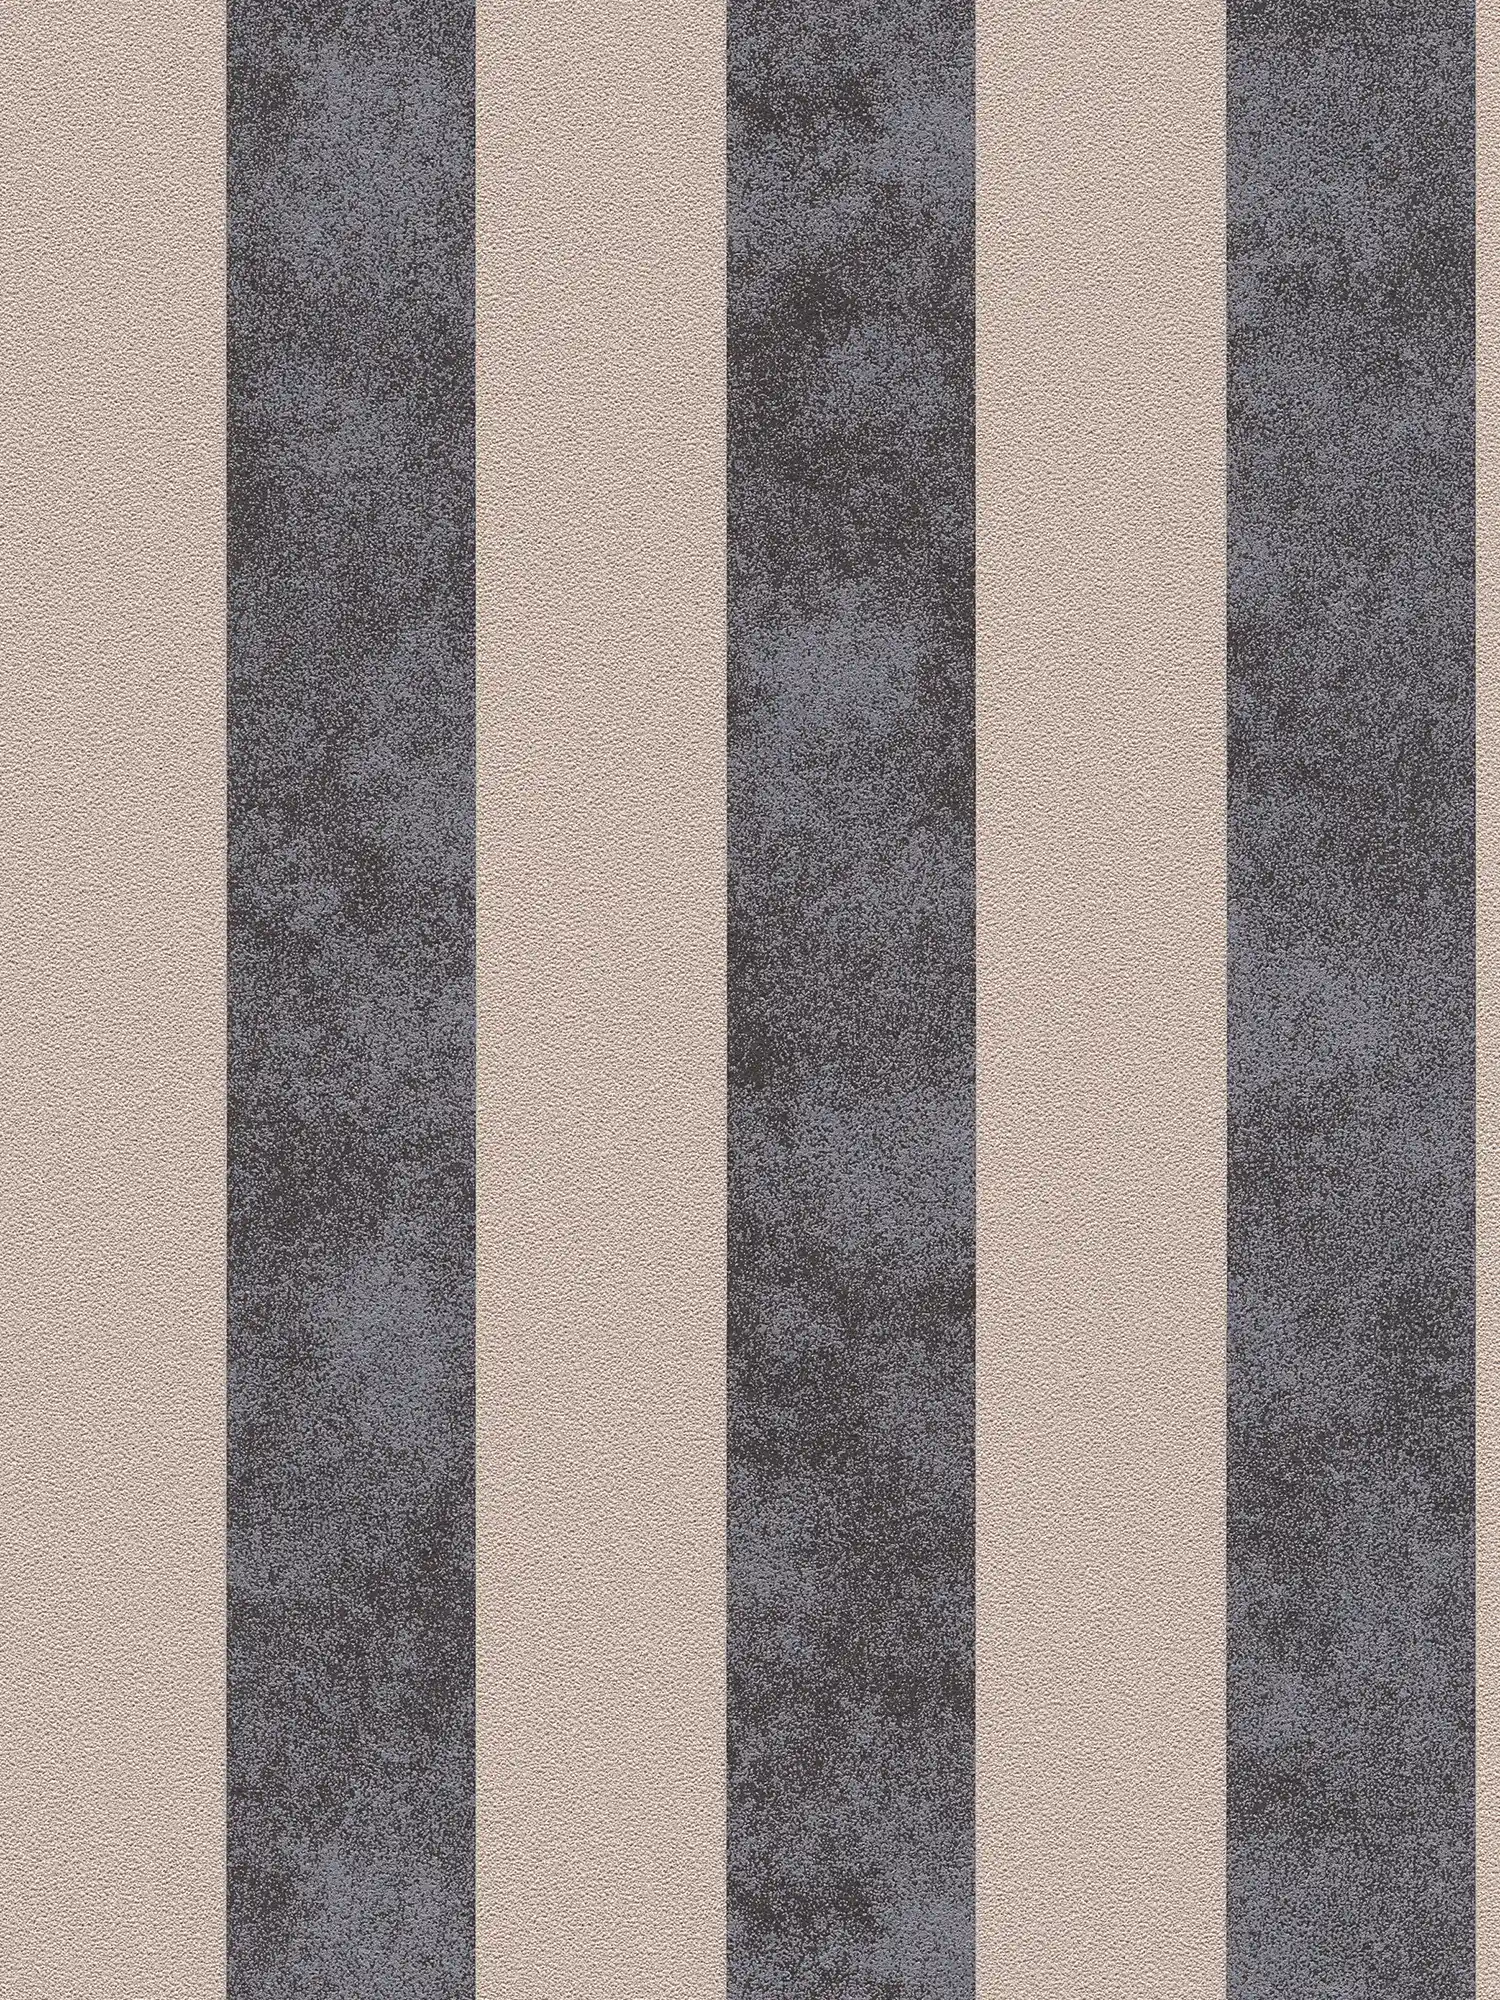 Block stripes wallpaper with colour and texture pattern - black, beige, silver
